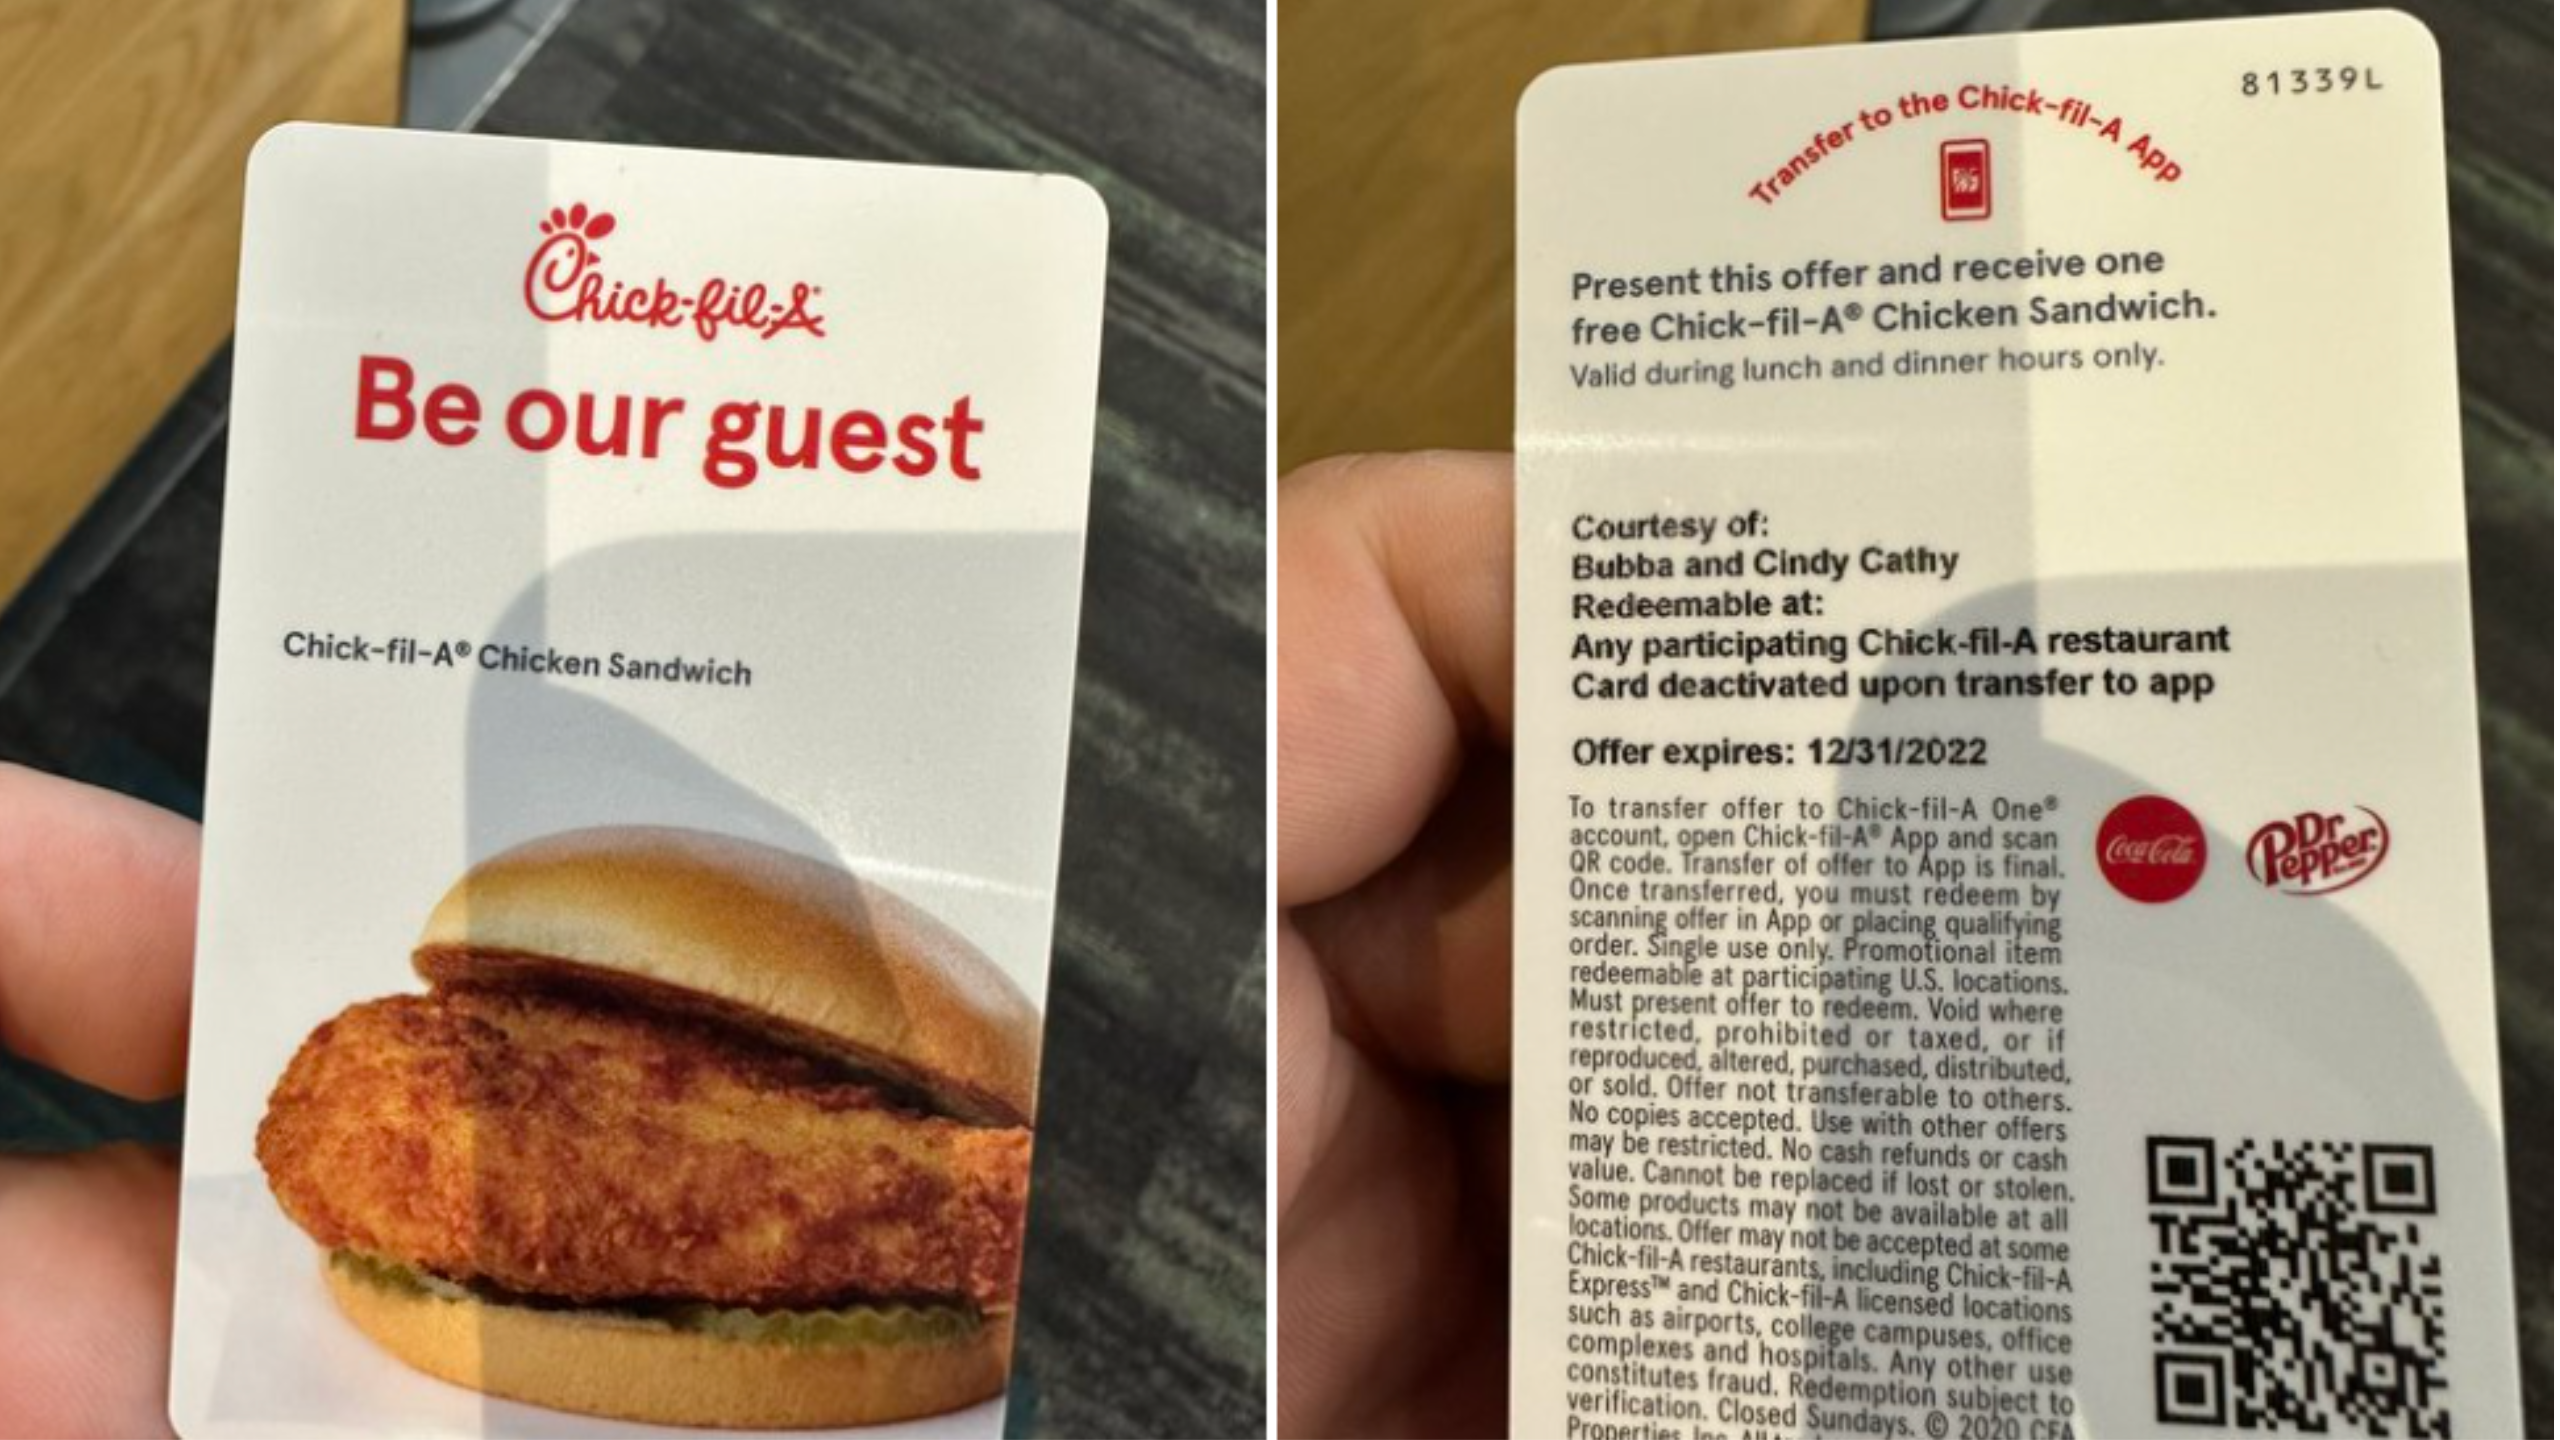 Dave Portnoy Crushed To Learn Chick-fil-A Card He Was Given Only Good For One Sandwich, Not Lifetime Supply: ‘Worst Gift Ever’